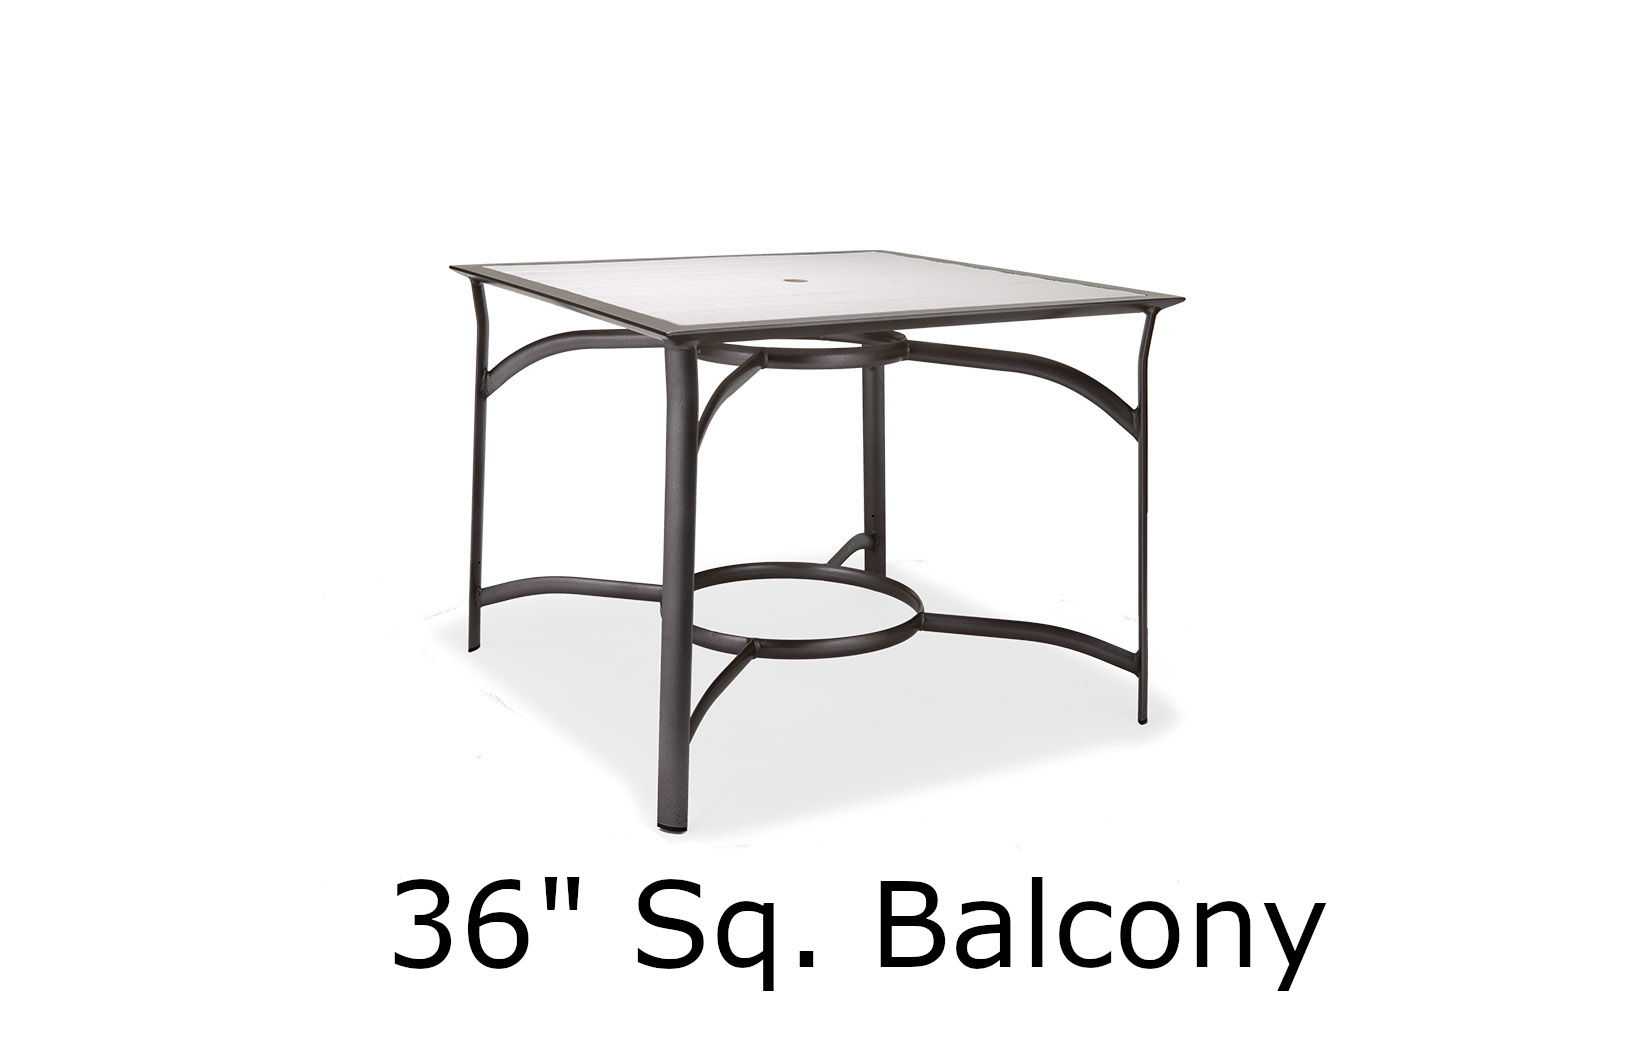 Seascape Collection 26 Inch Square Balcony Height Table